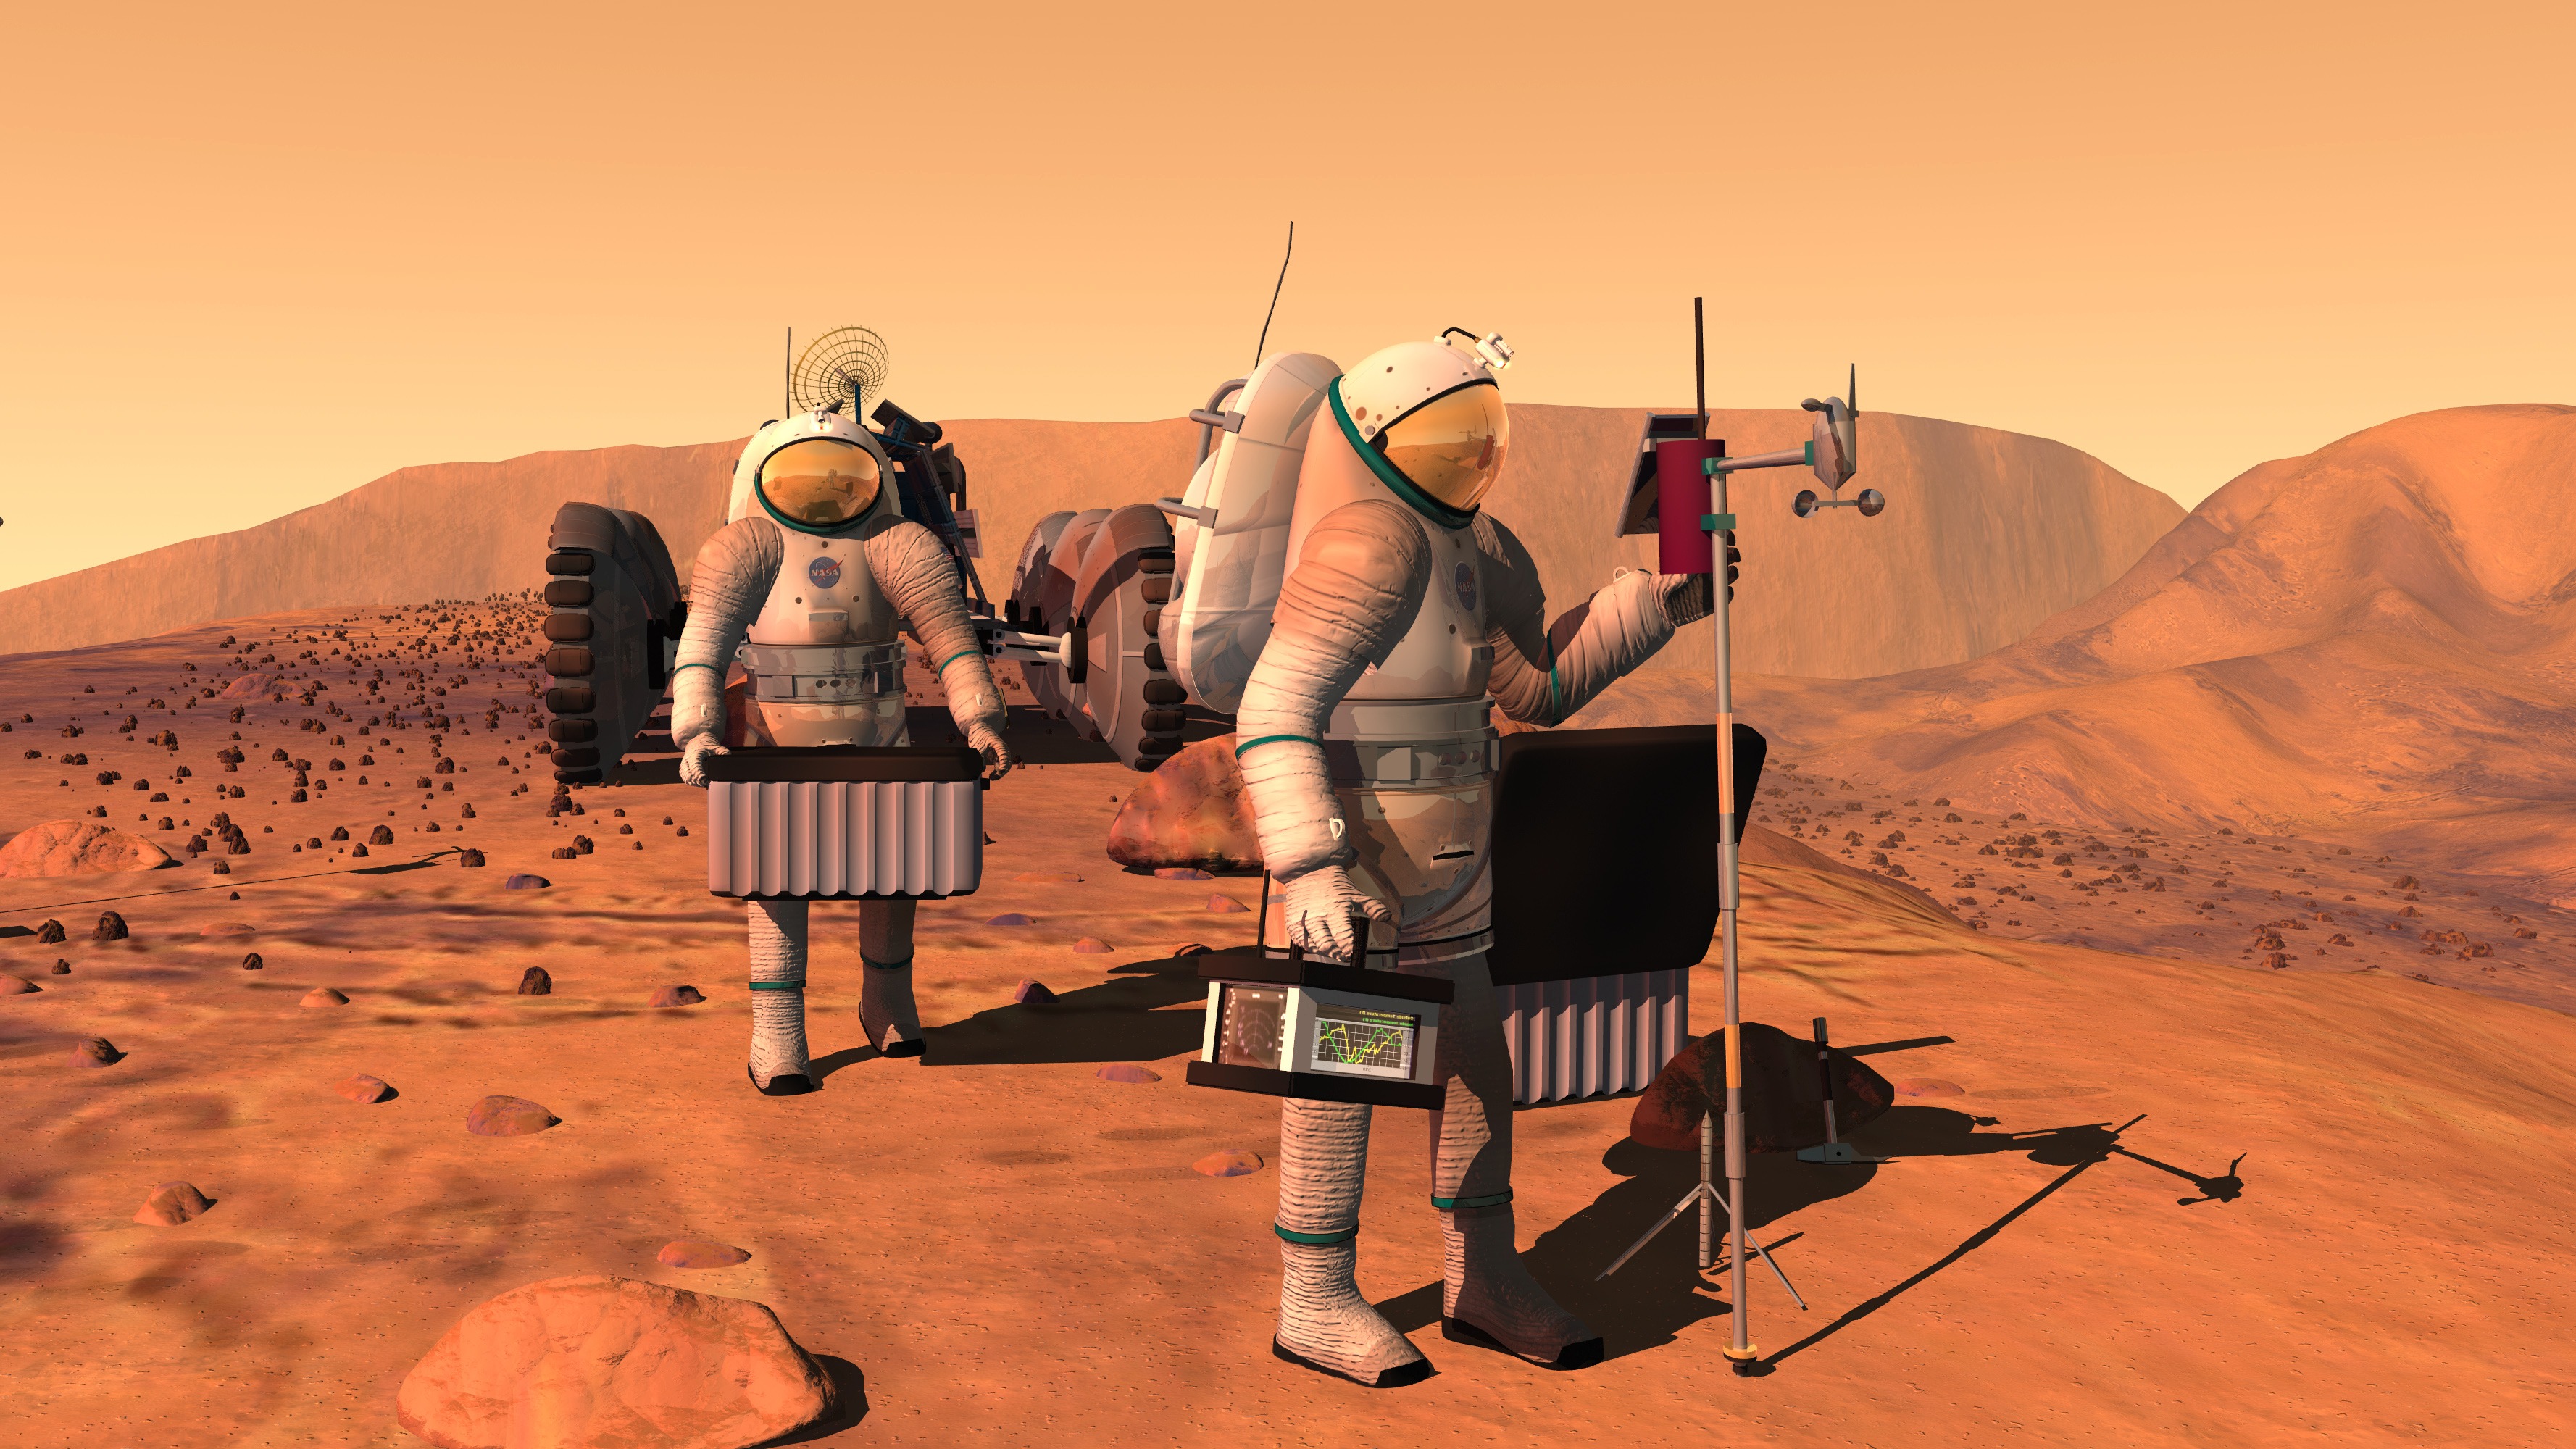 Manned_mission_to_Mars_(artist's_concept)